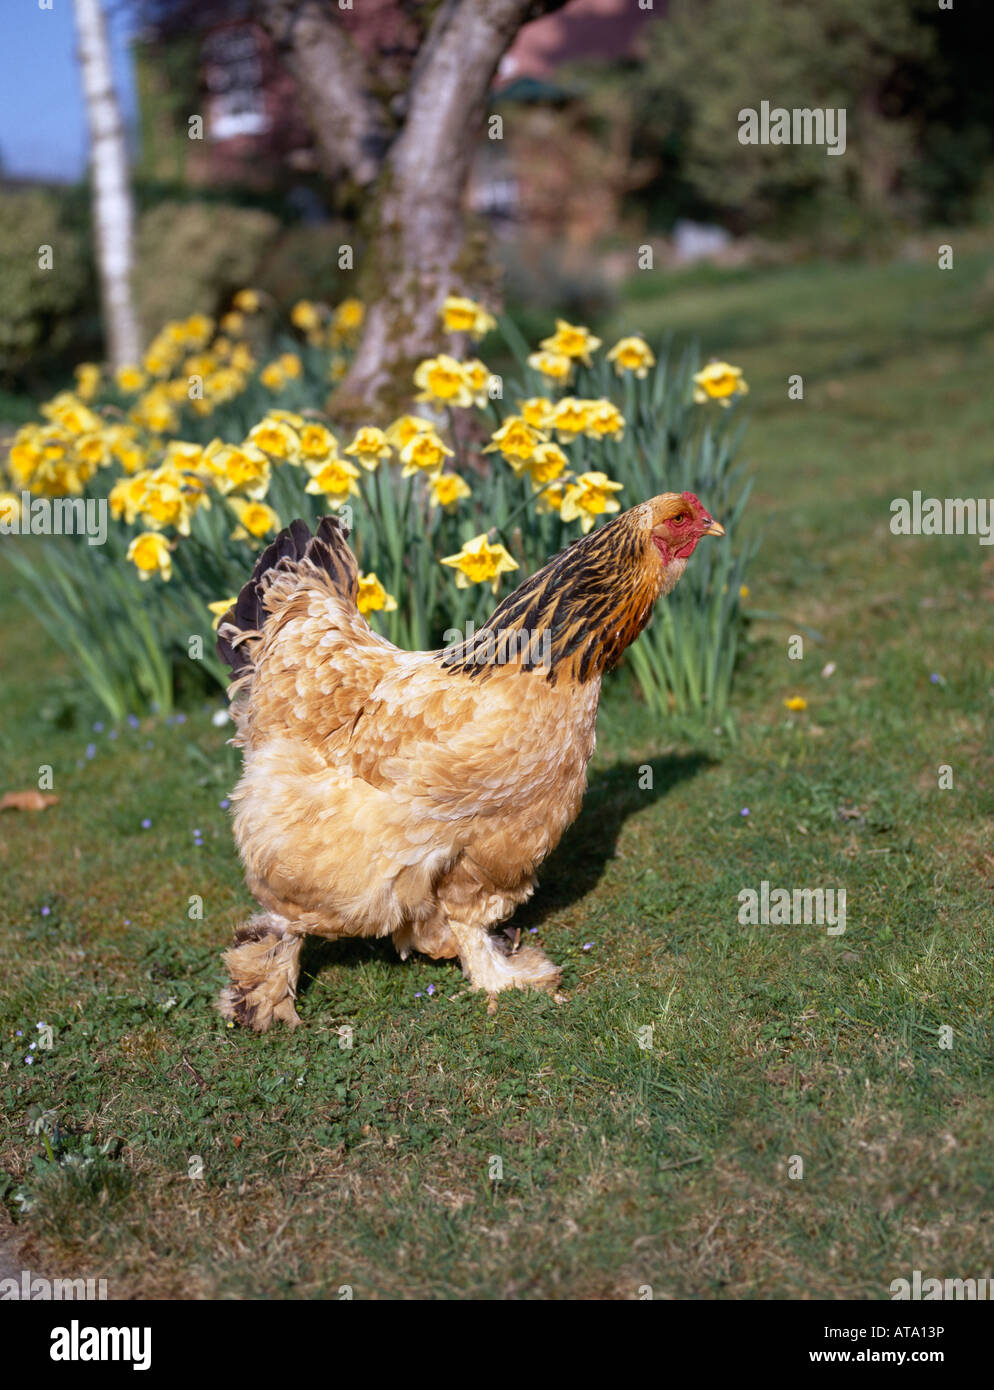 FREE RANGE CHICKEN IN GARDEN WITH DAFFODILS Stock Photo